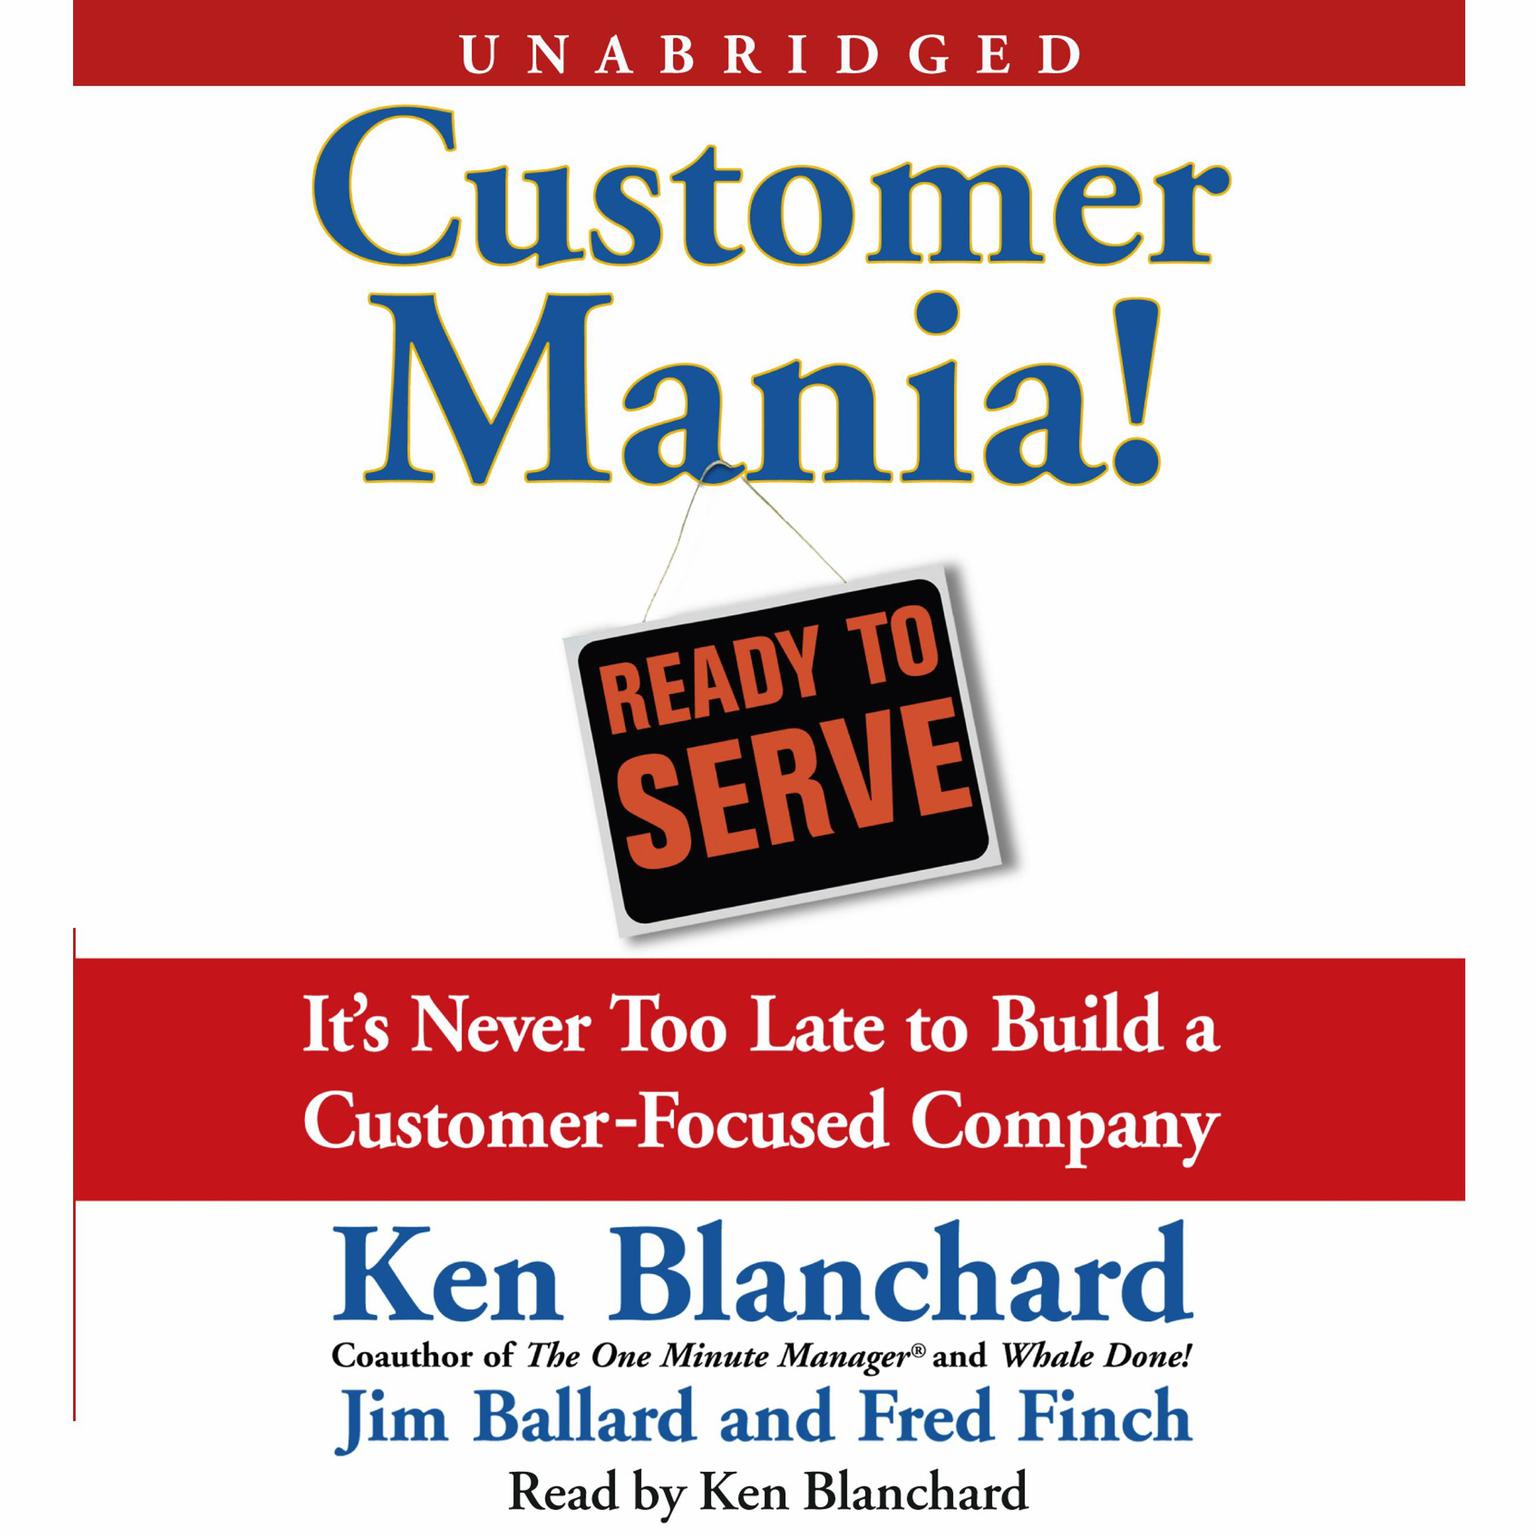 Customer Mania!: Its Never Too Late to Build a Customer-Focused Company Audiobook, by Ken Blanchard